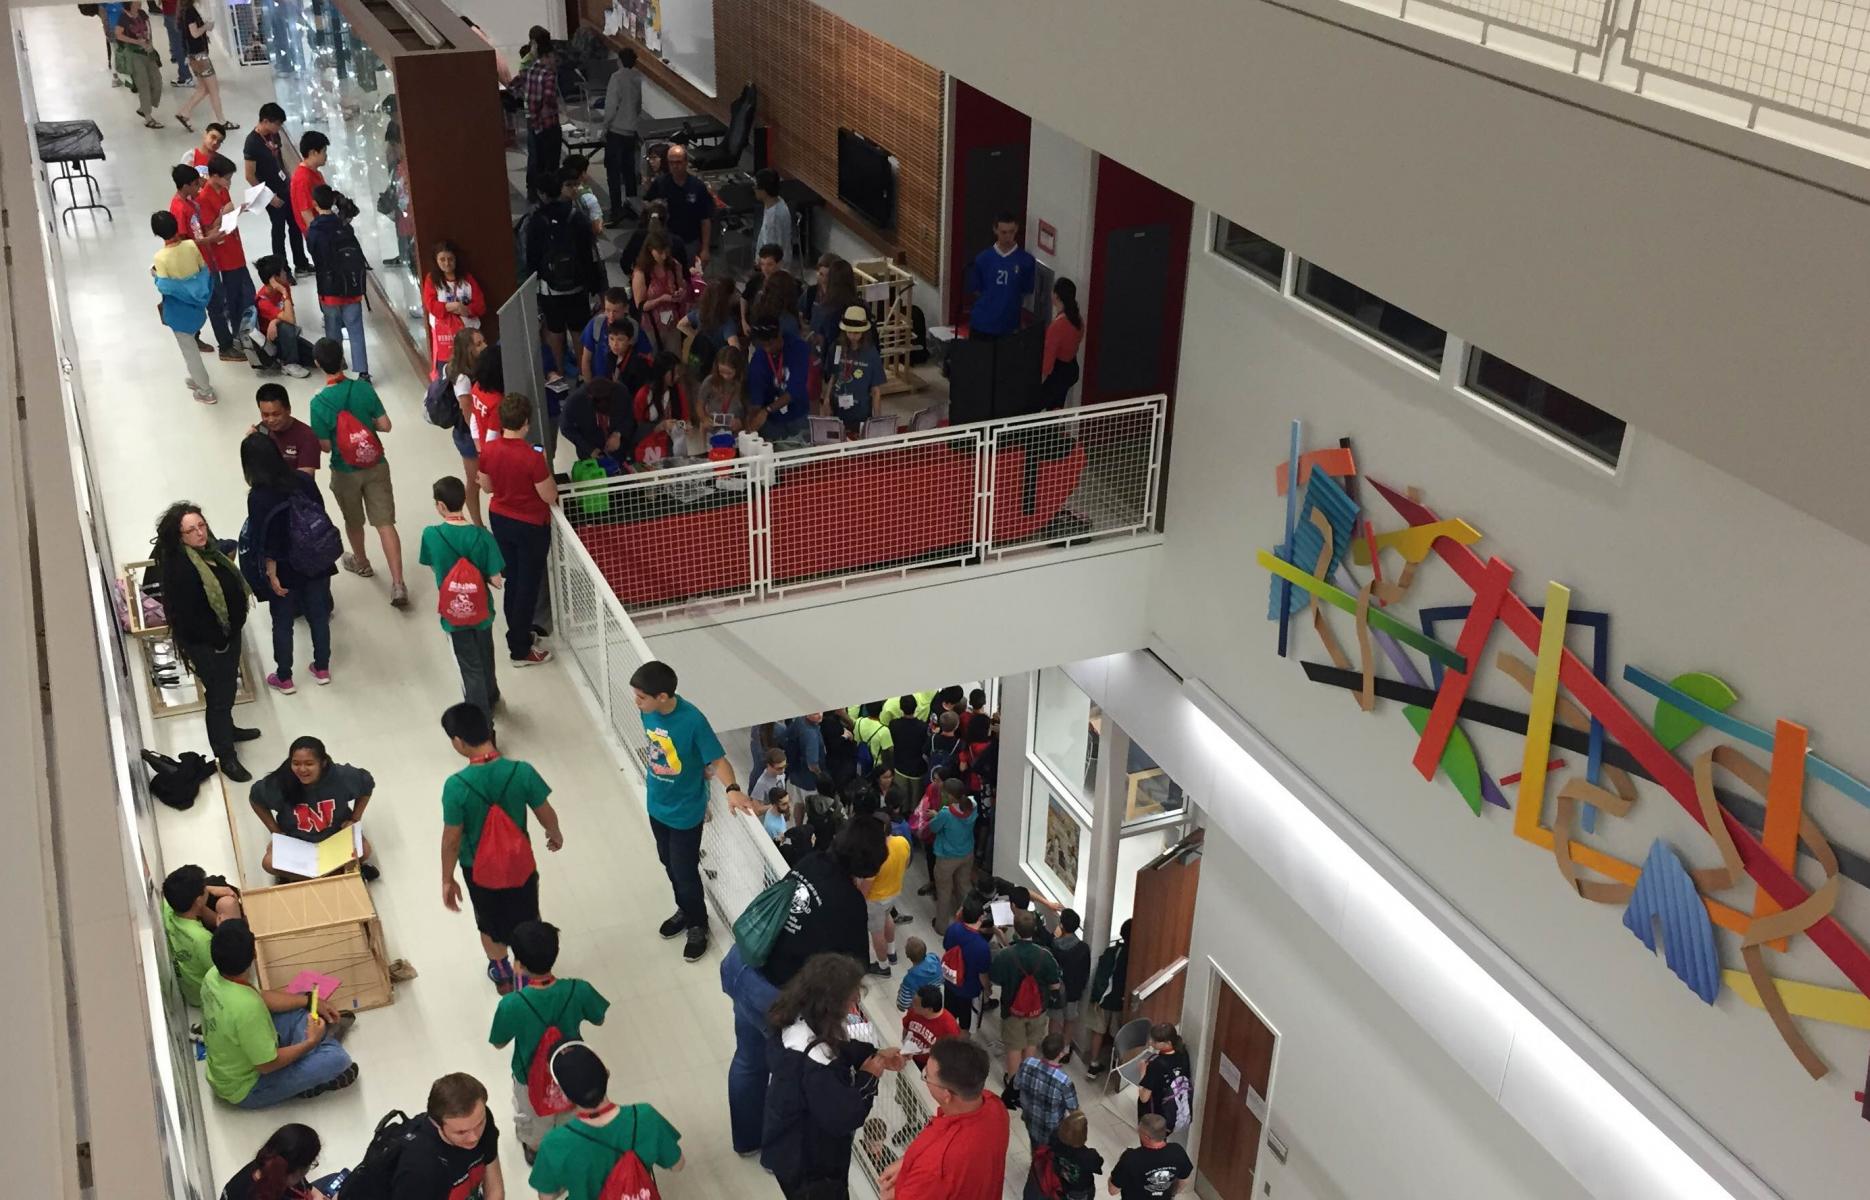 Jorgensen Hall hosts national Science Olympiad events